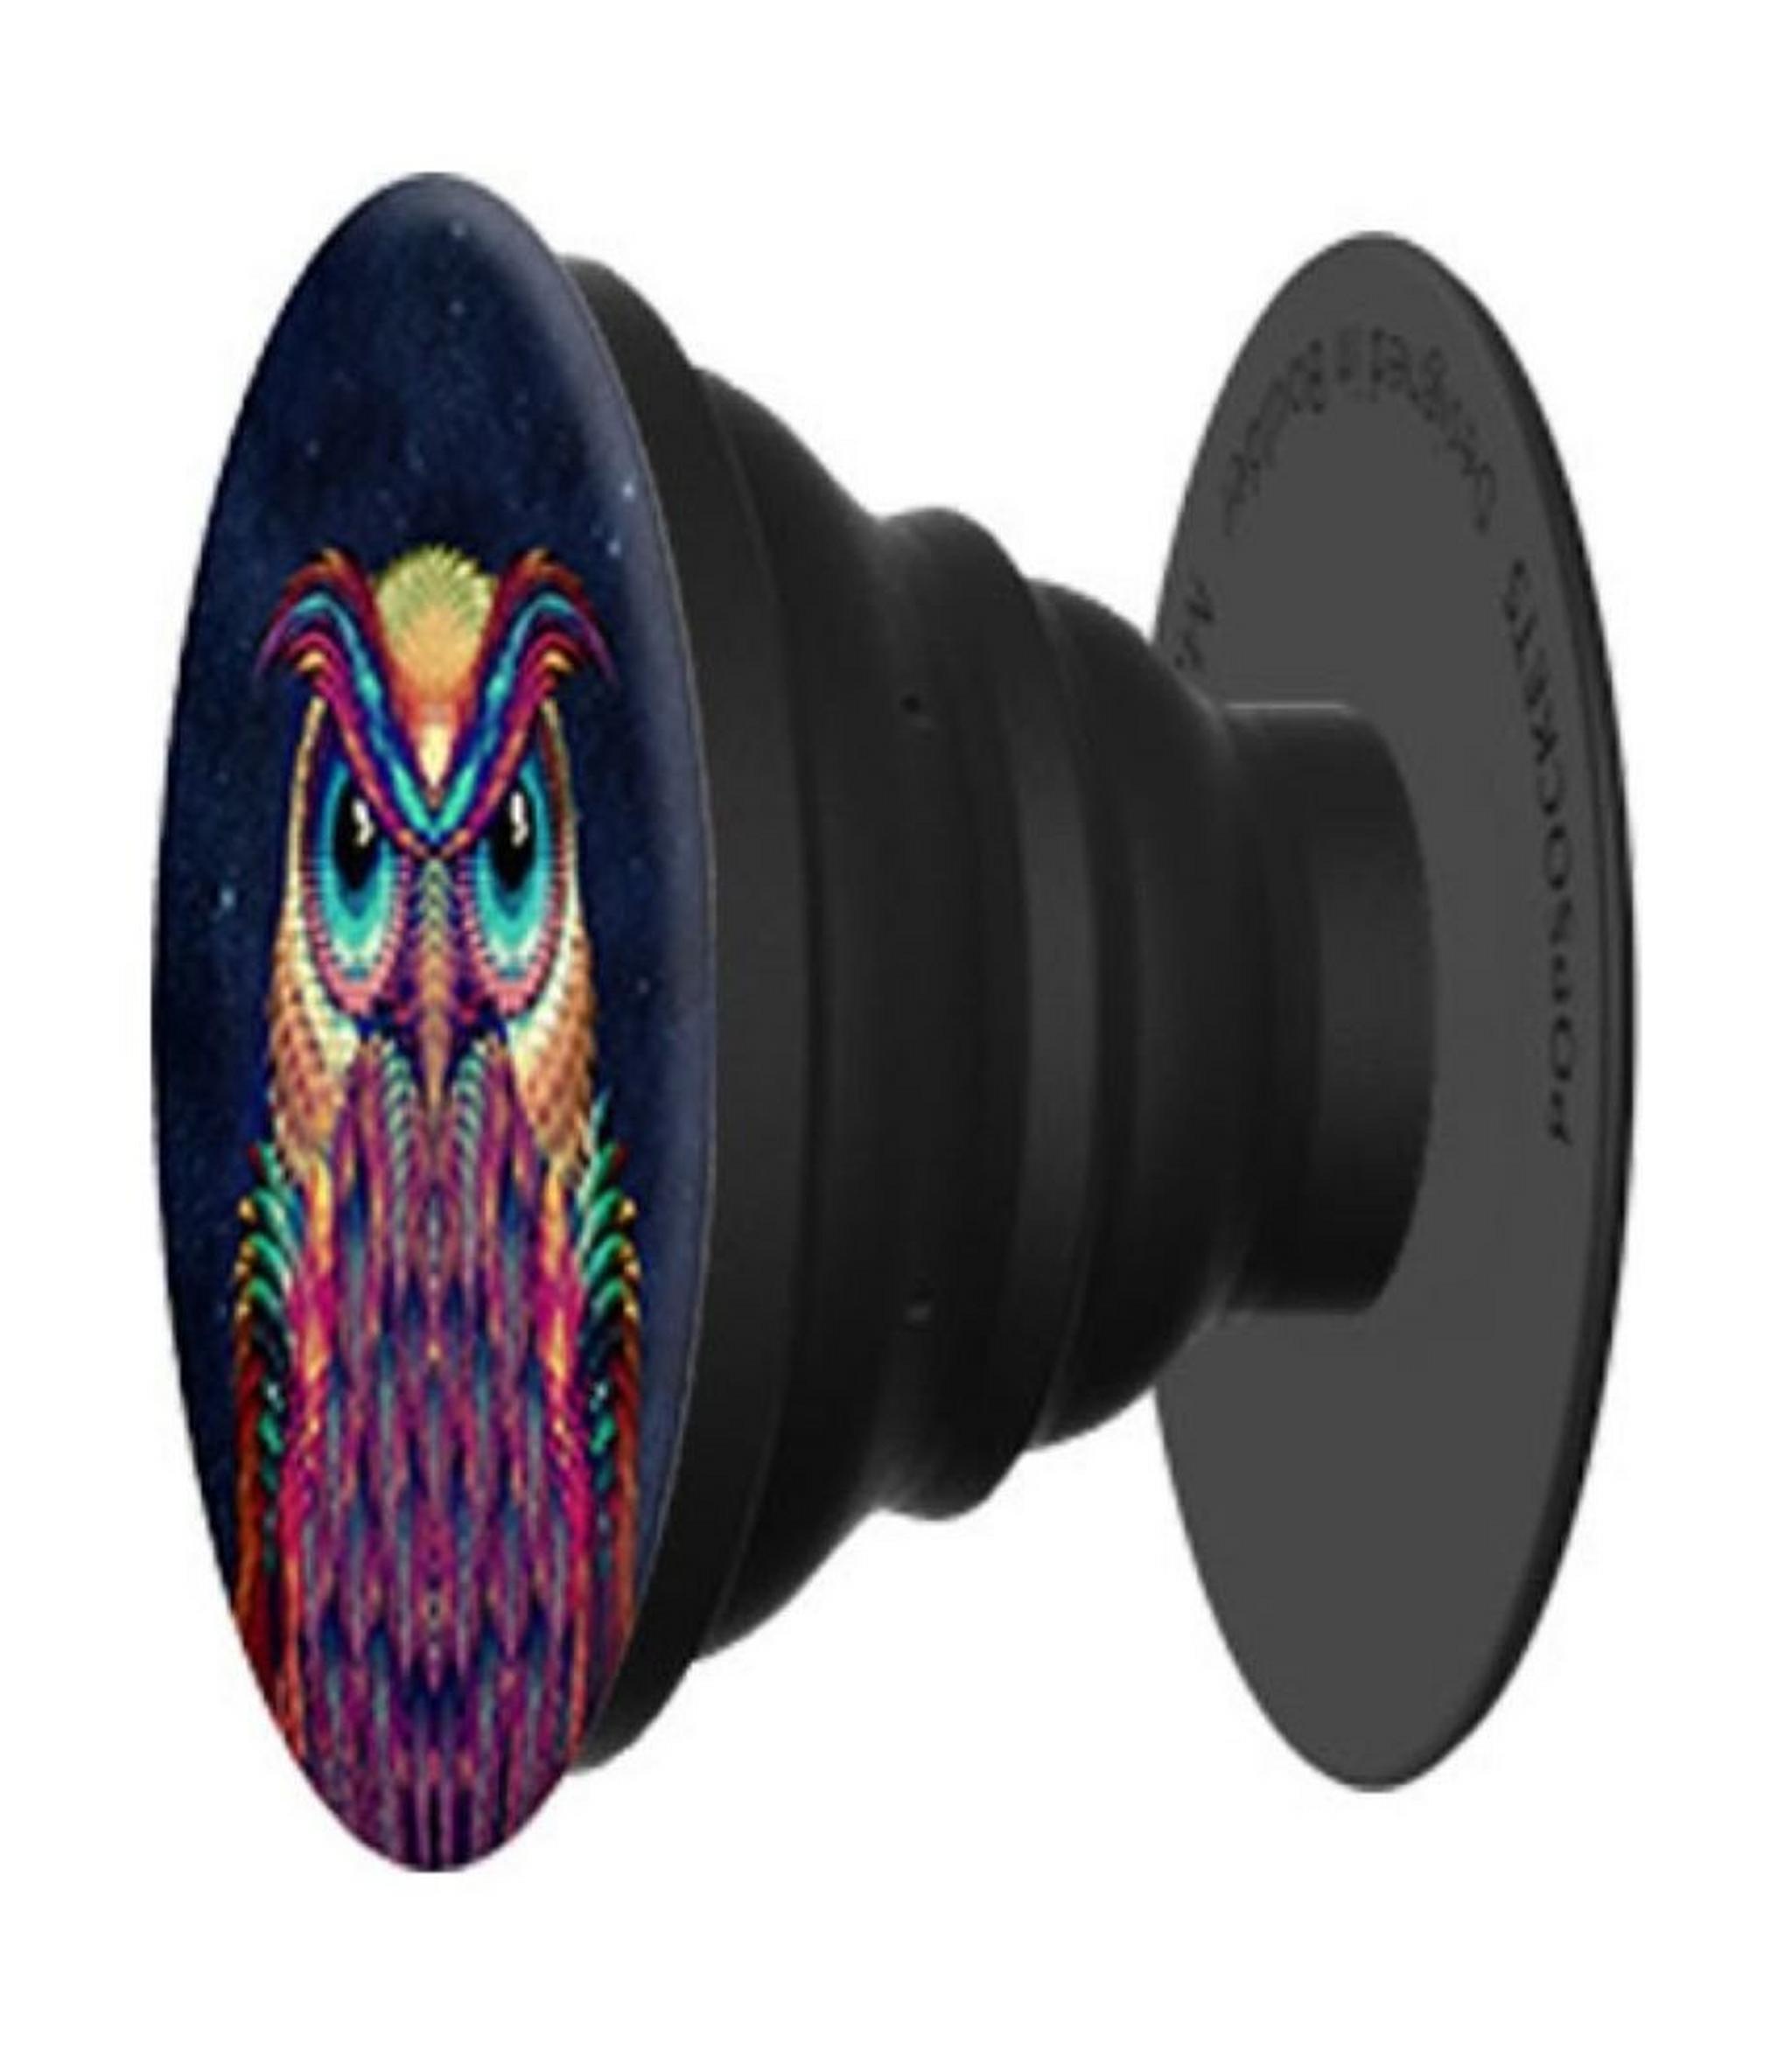 PopSocket Expanding Stand and Grip for Smartphones and Tablets – Owl 2